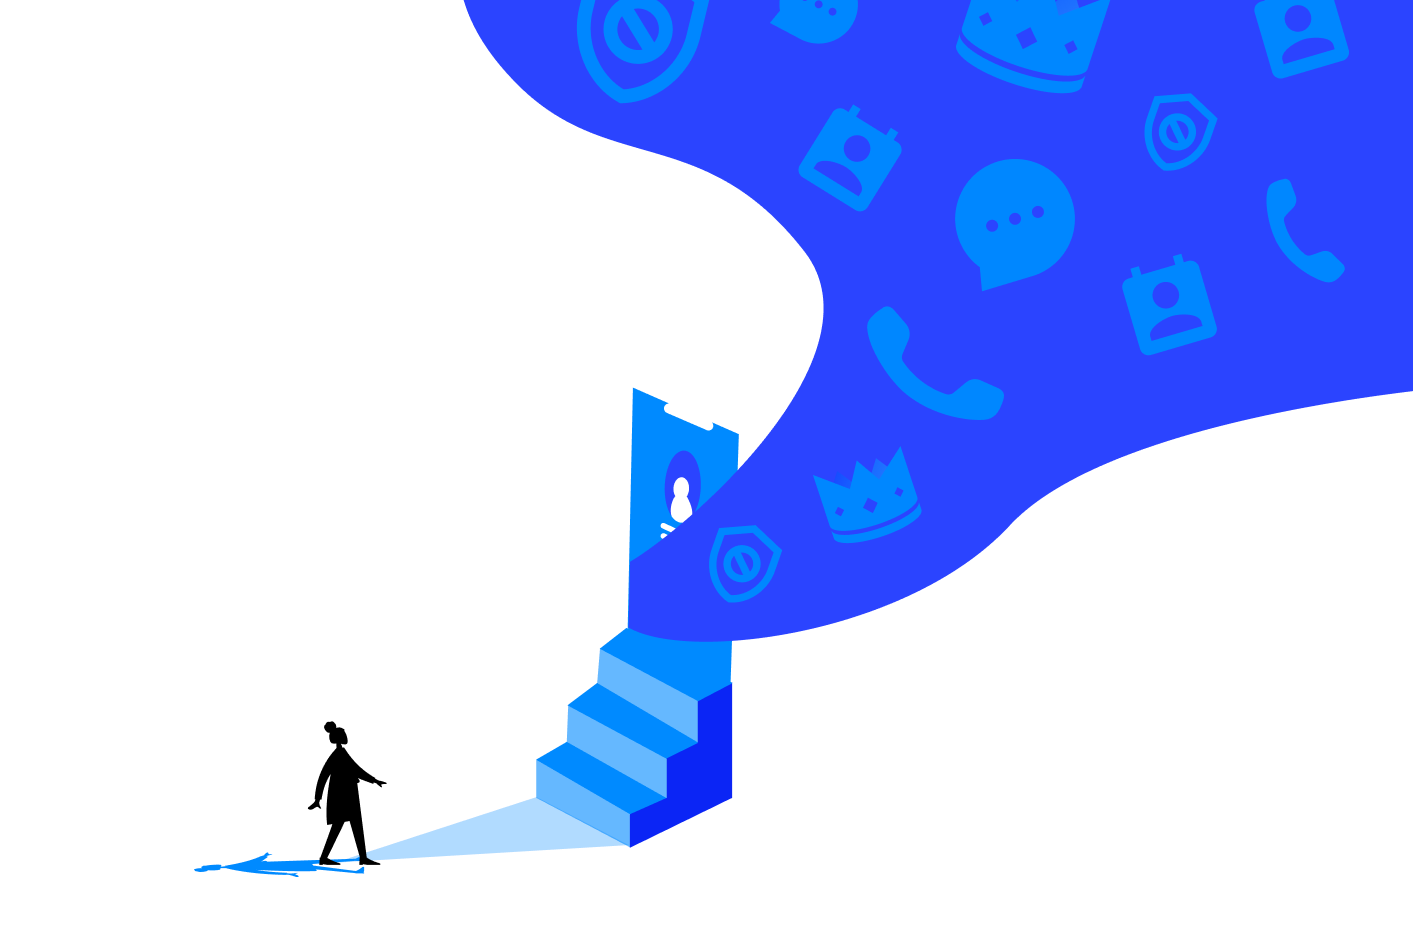 Illustration that represents Truecaller and its features